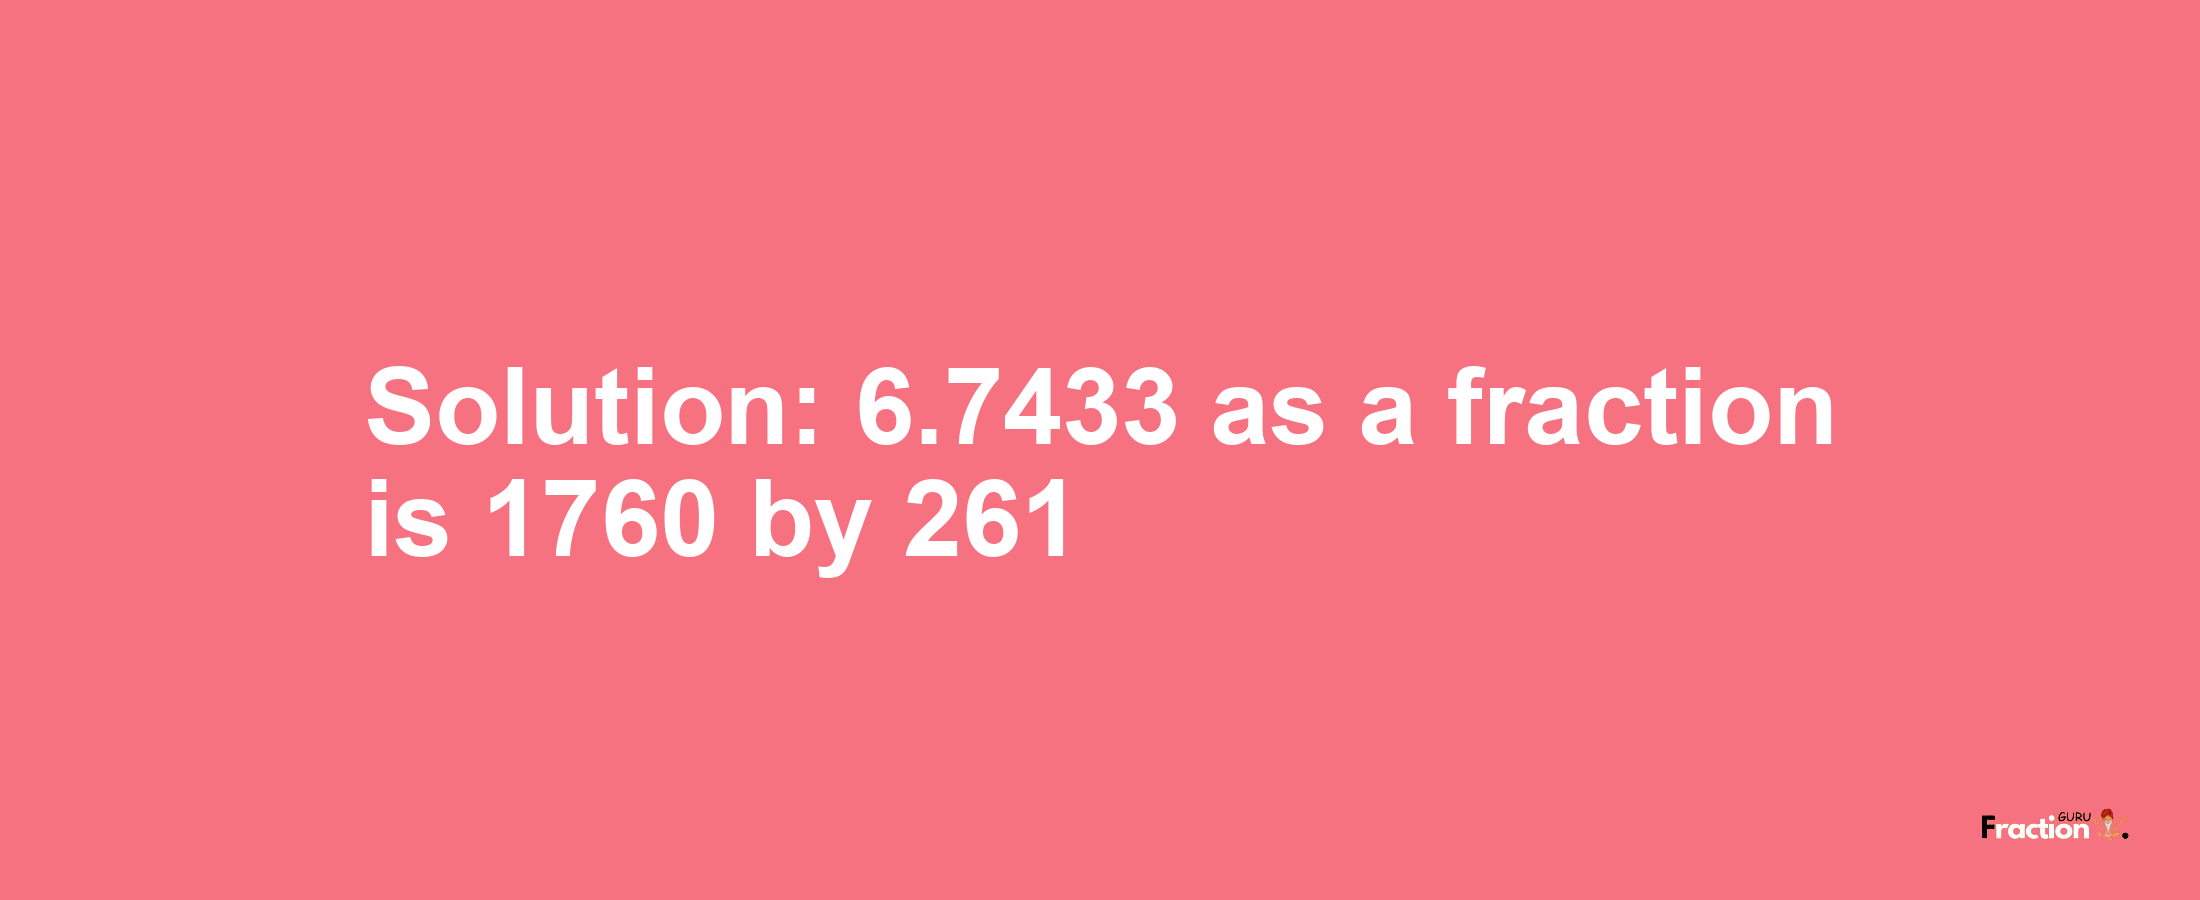 Solution:6.7433 as a fraction is 1760/261